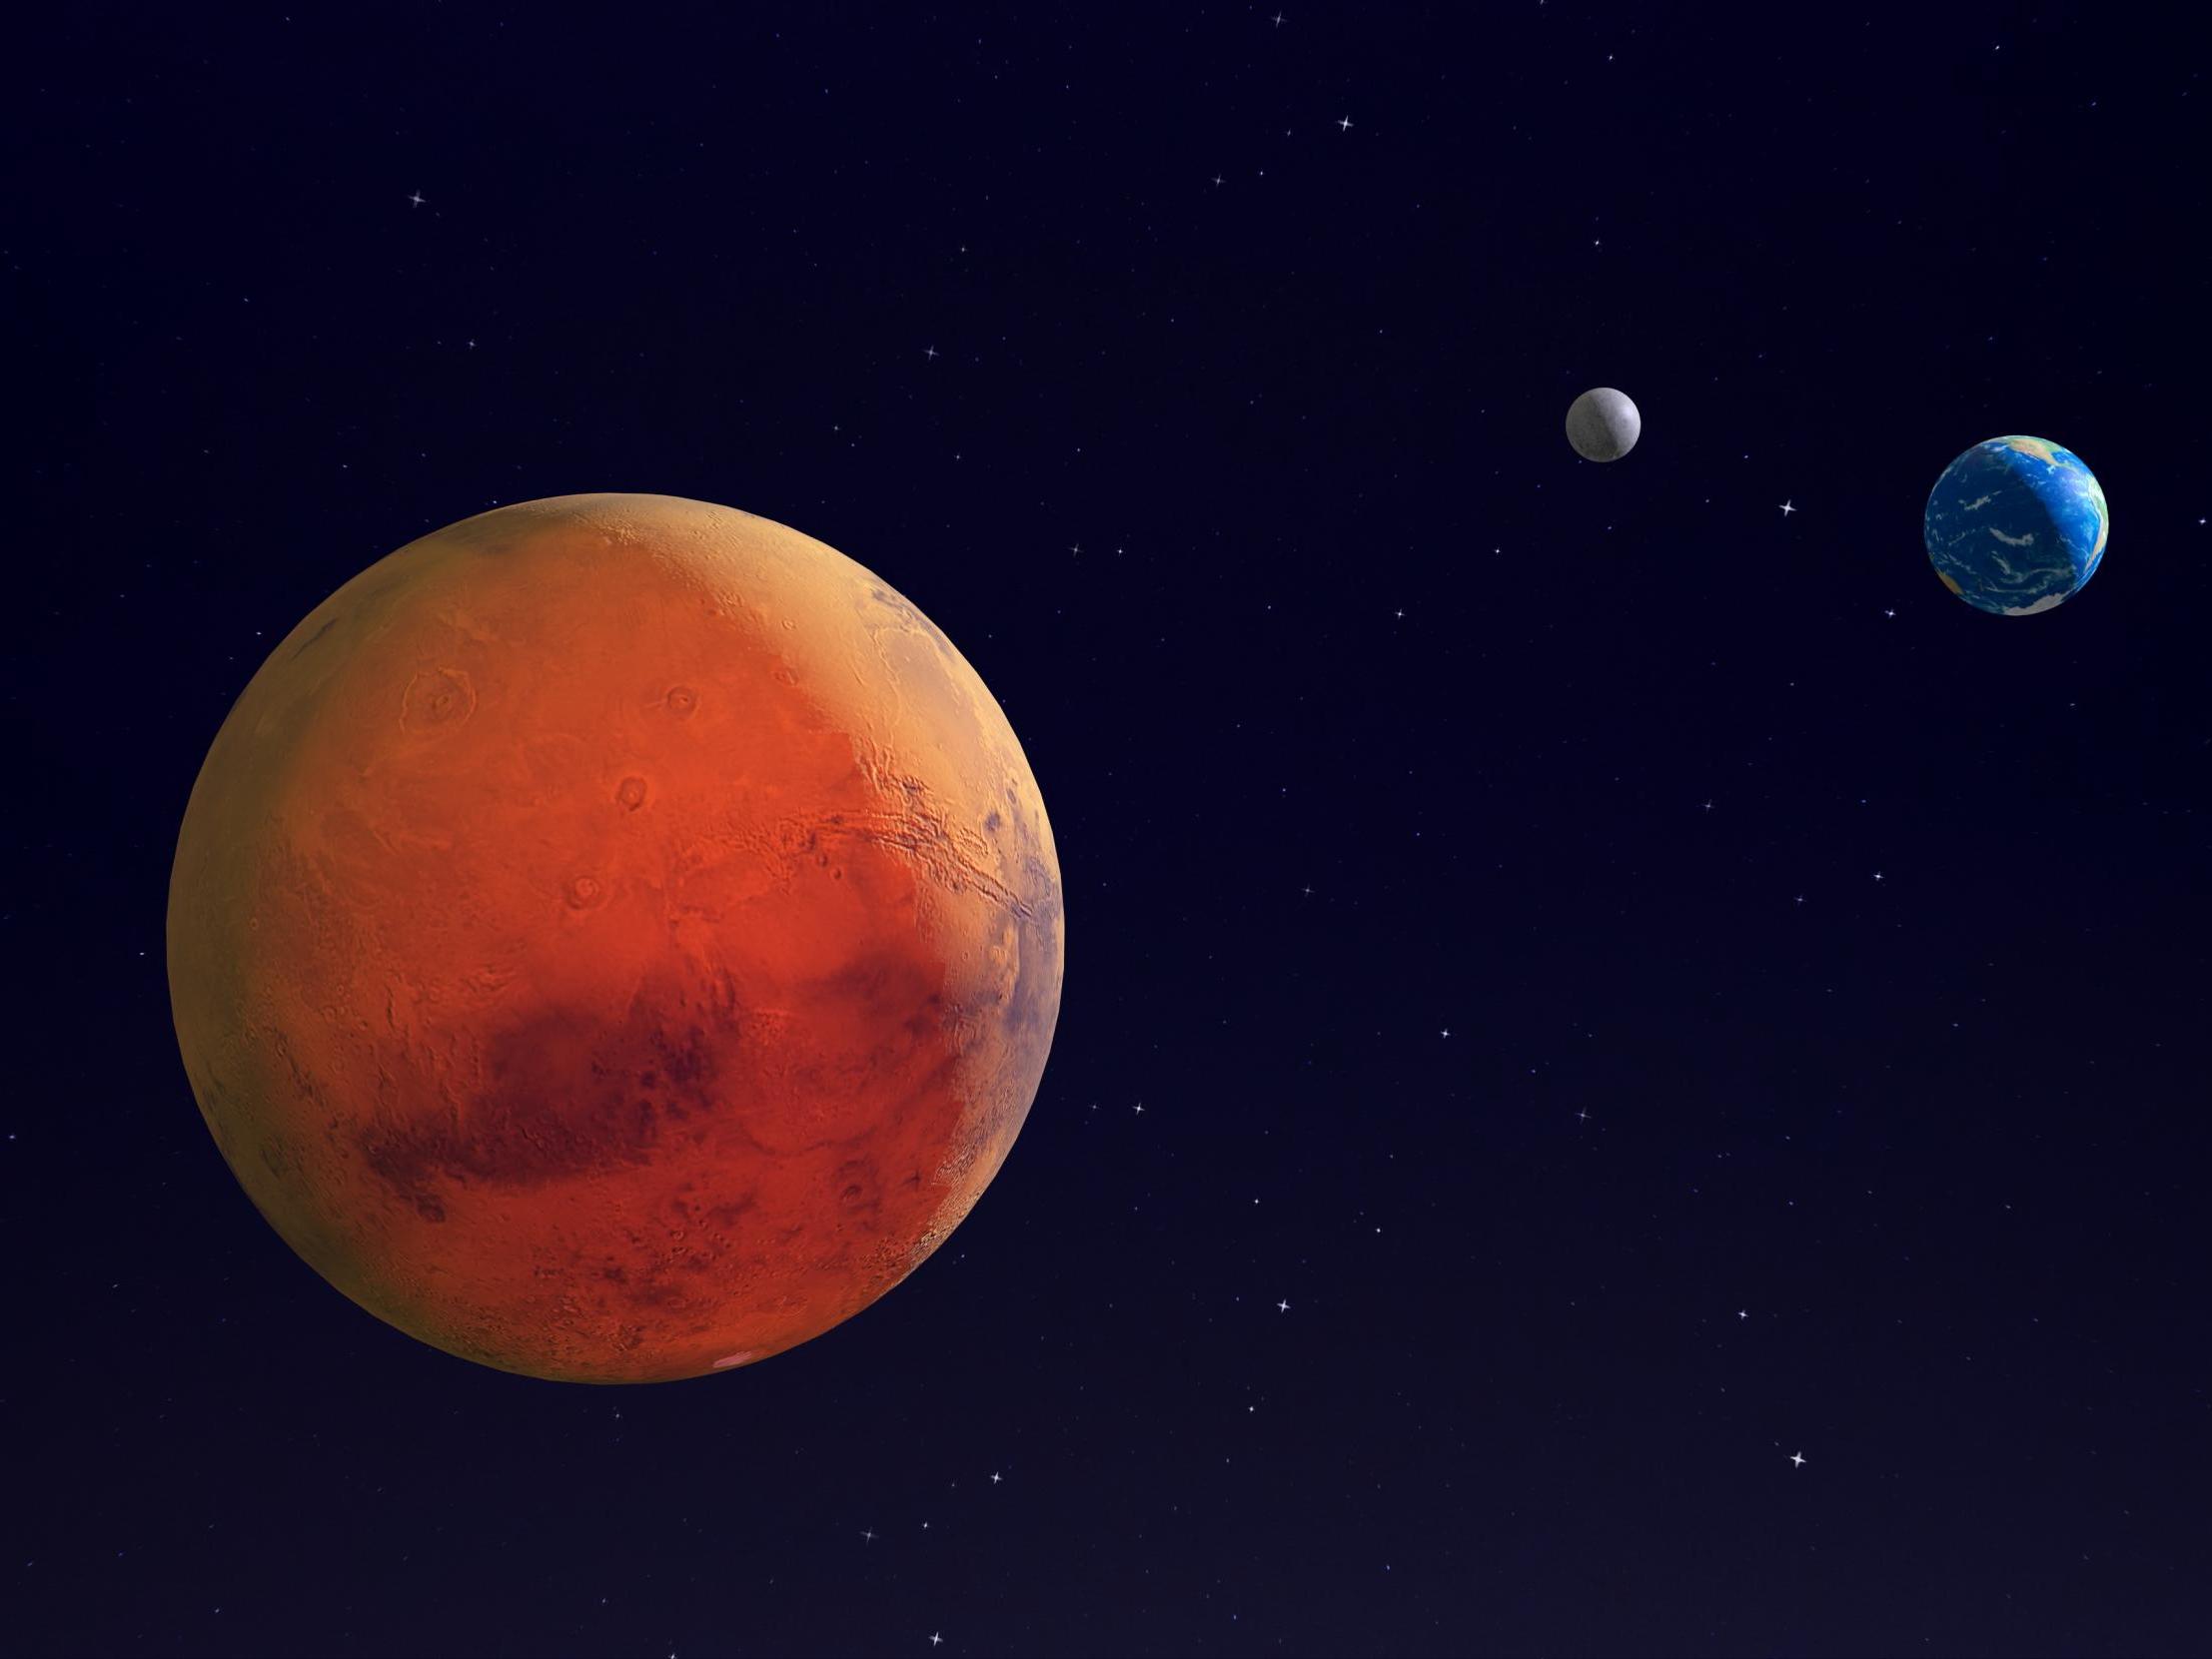 Mars, Earth and the Moon in space - 3d render - elements of this image furnished by NASA